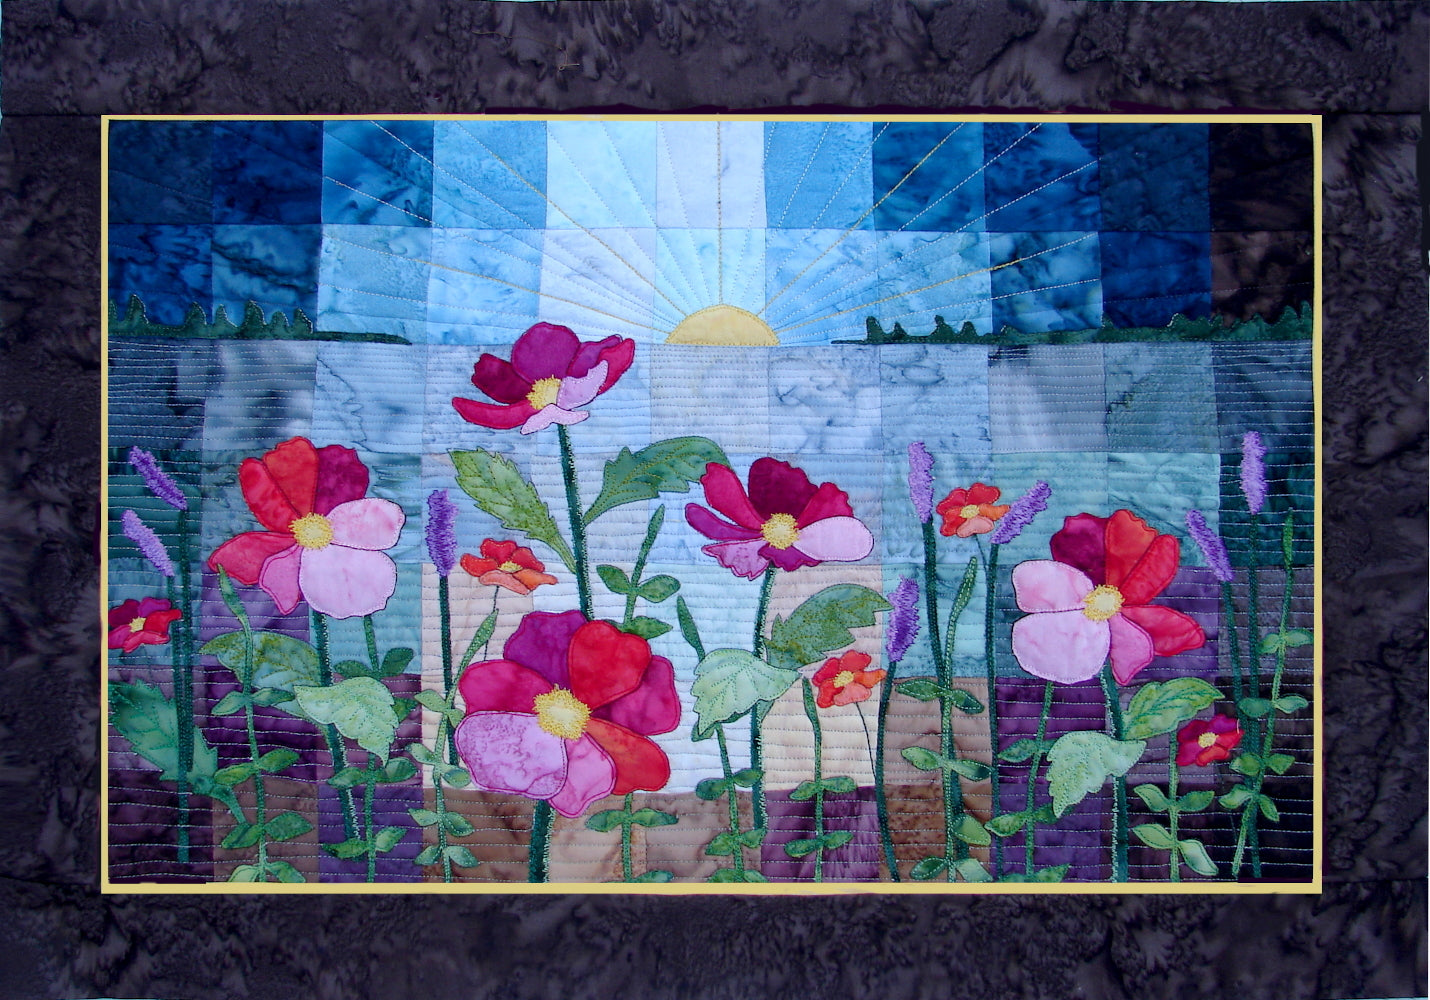 applique wild flower quilt pattern with sunset or sunrise over a patchwork lake. 